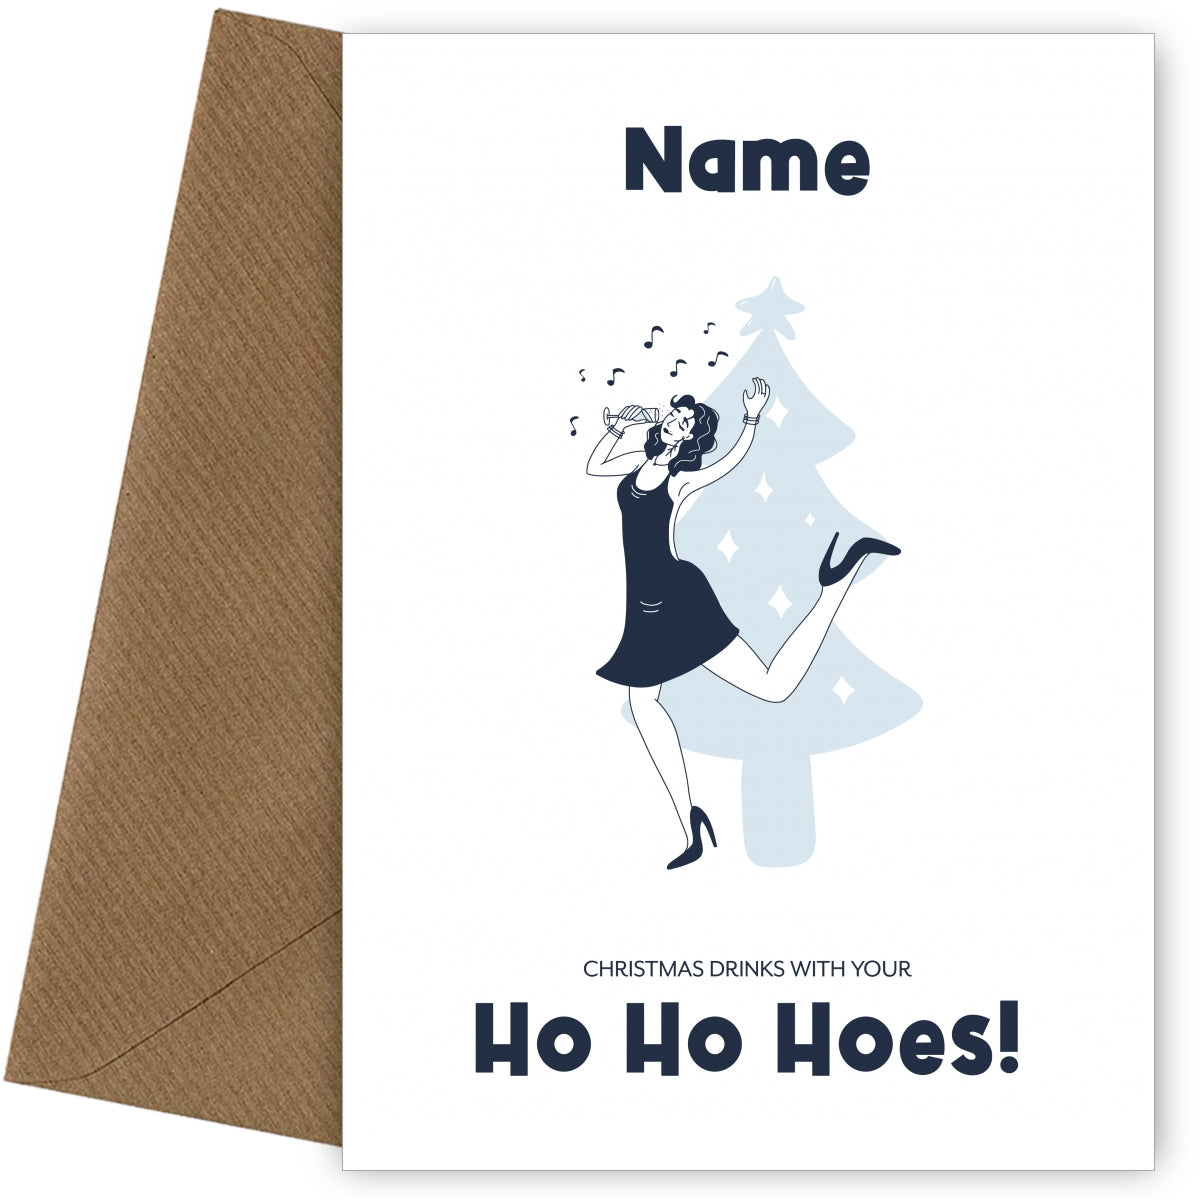 Funny Christmas Card for Her, Wife, Auntie, Sister or Friend - Drinks with Ho Ho Hoes!